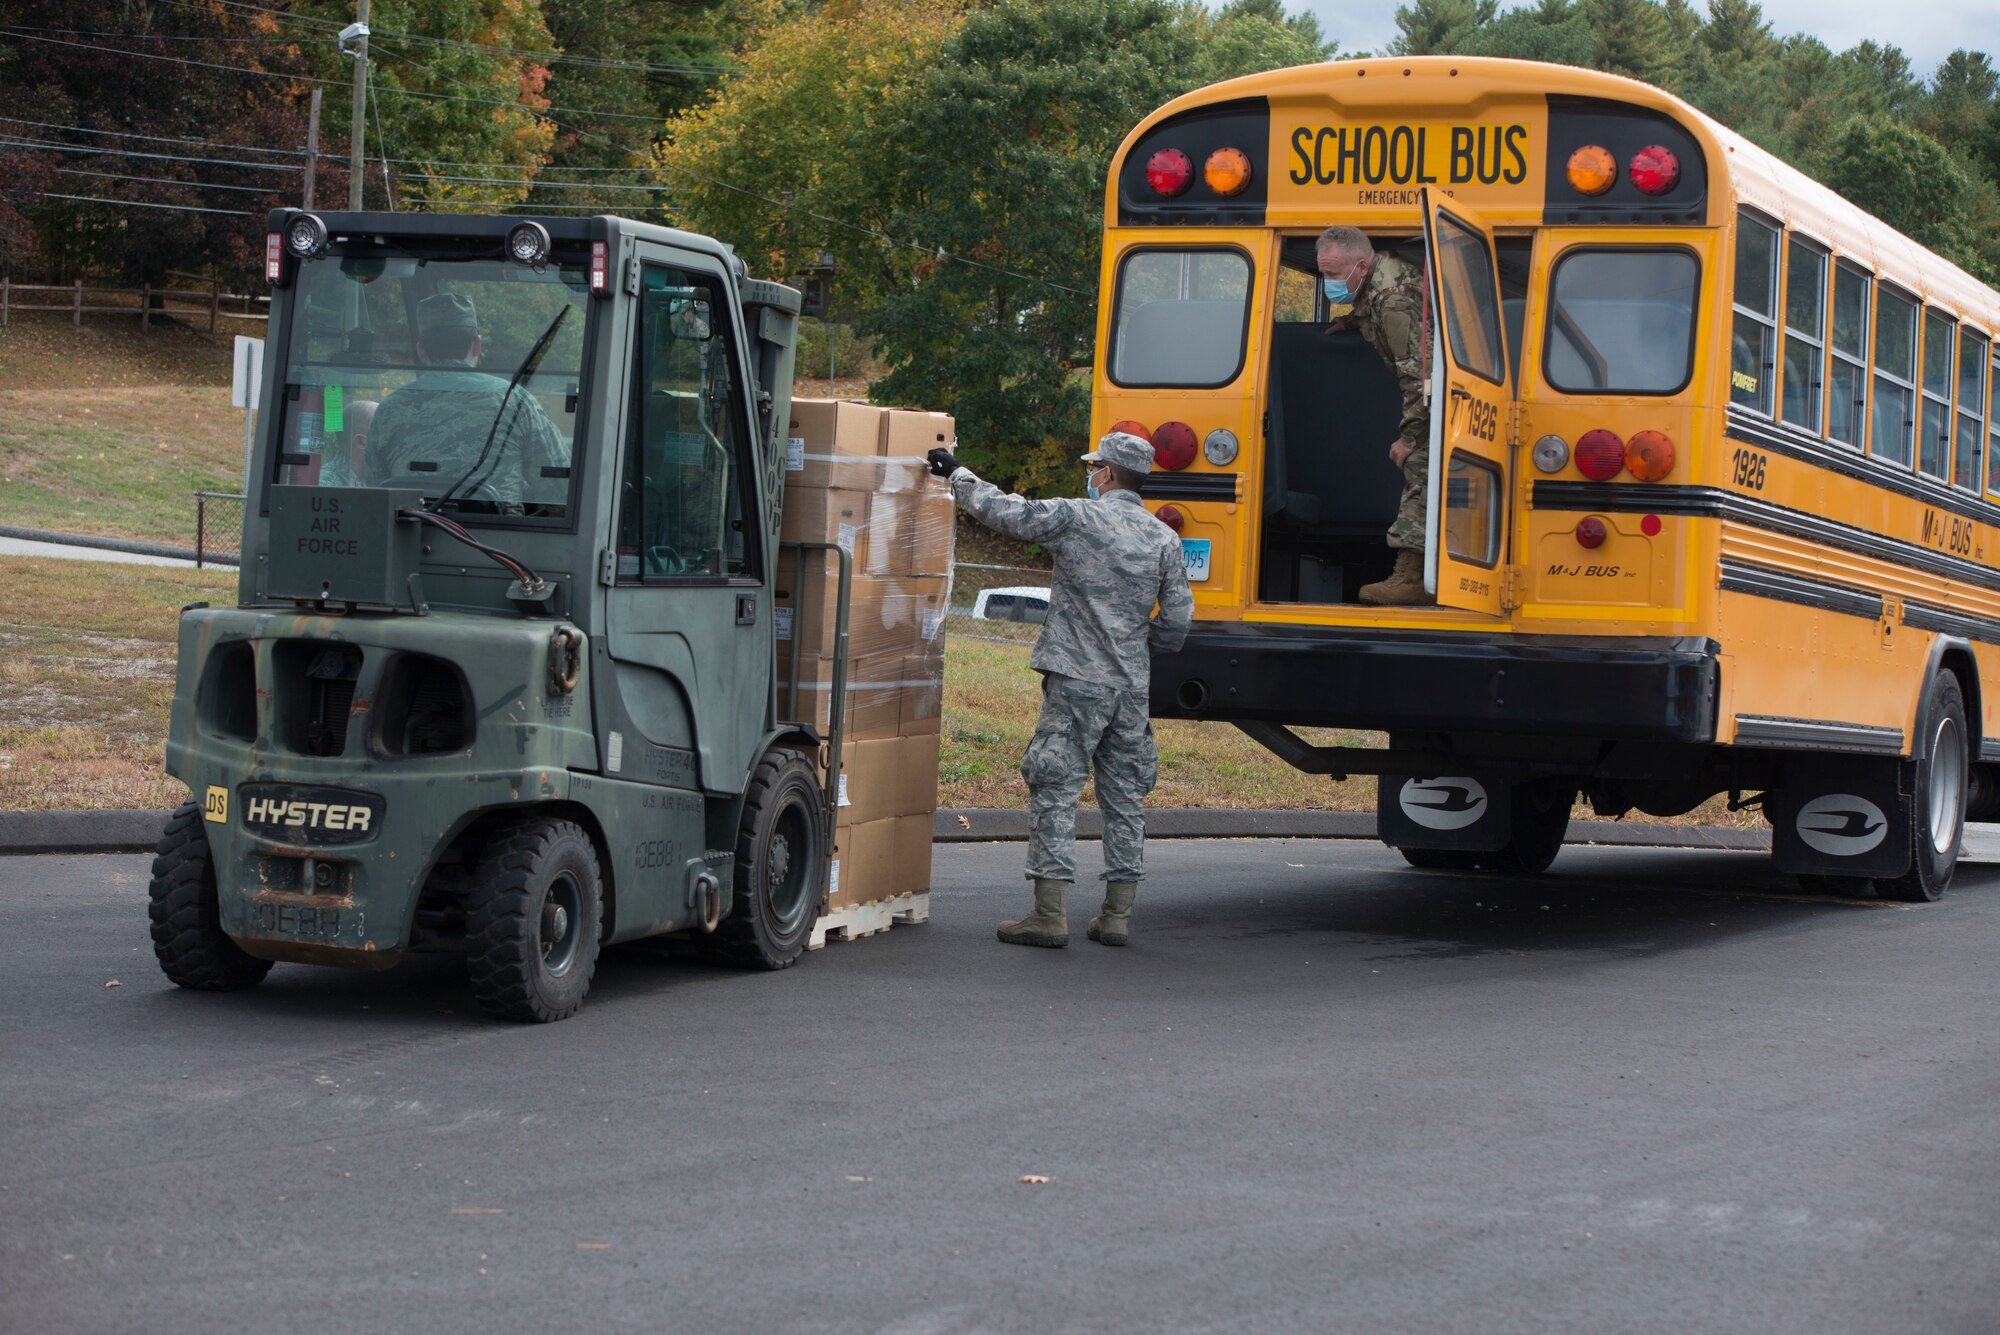 Members of the Connecticut Air National Guard, 103rd Logistics Readiness Squadron, load Farmers to Families Food Boxes onto a school bus at the Killingly Highway Department in Dayville, Connecticut, Sept. 30, 2020. The boxes were going to be delivered to homes and food pantries.